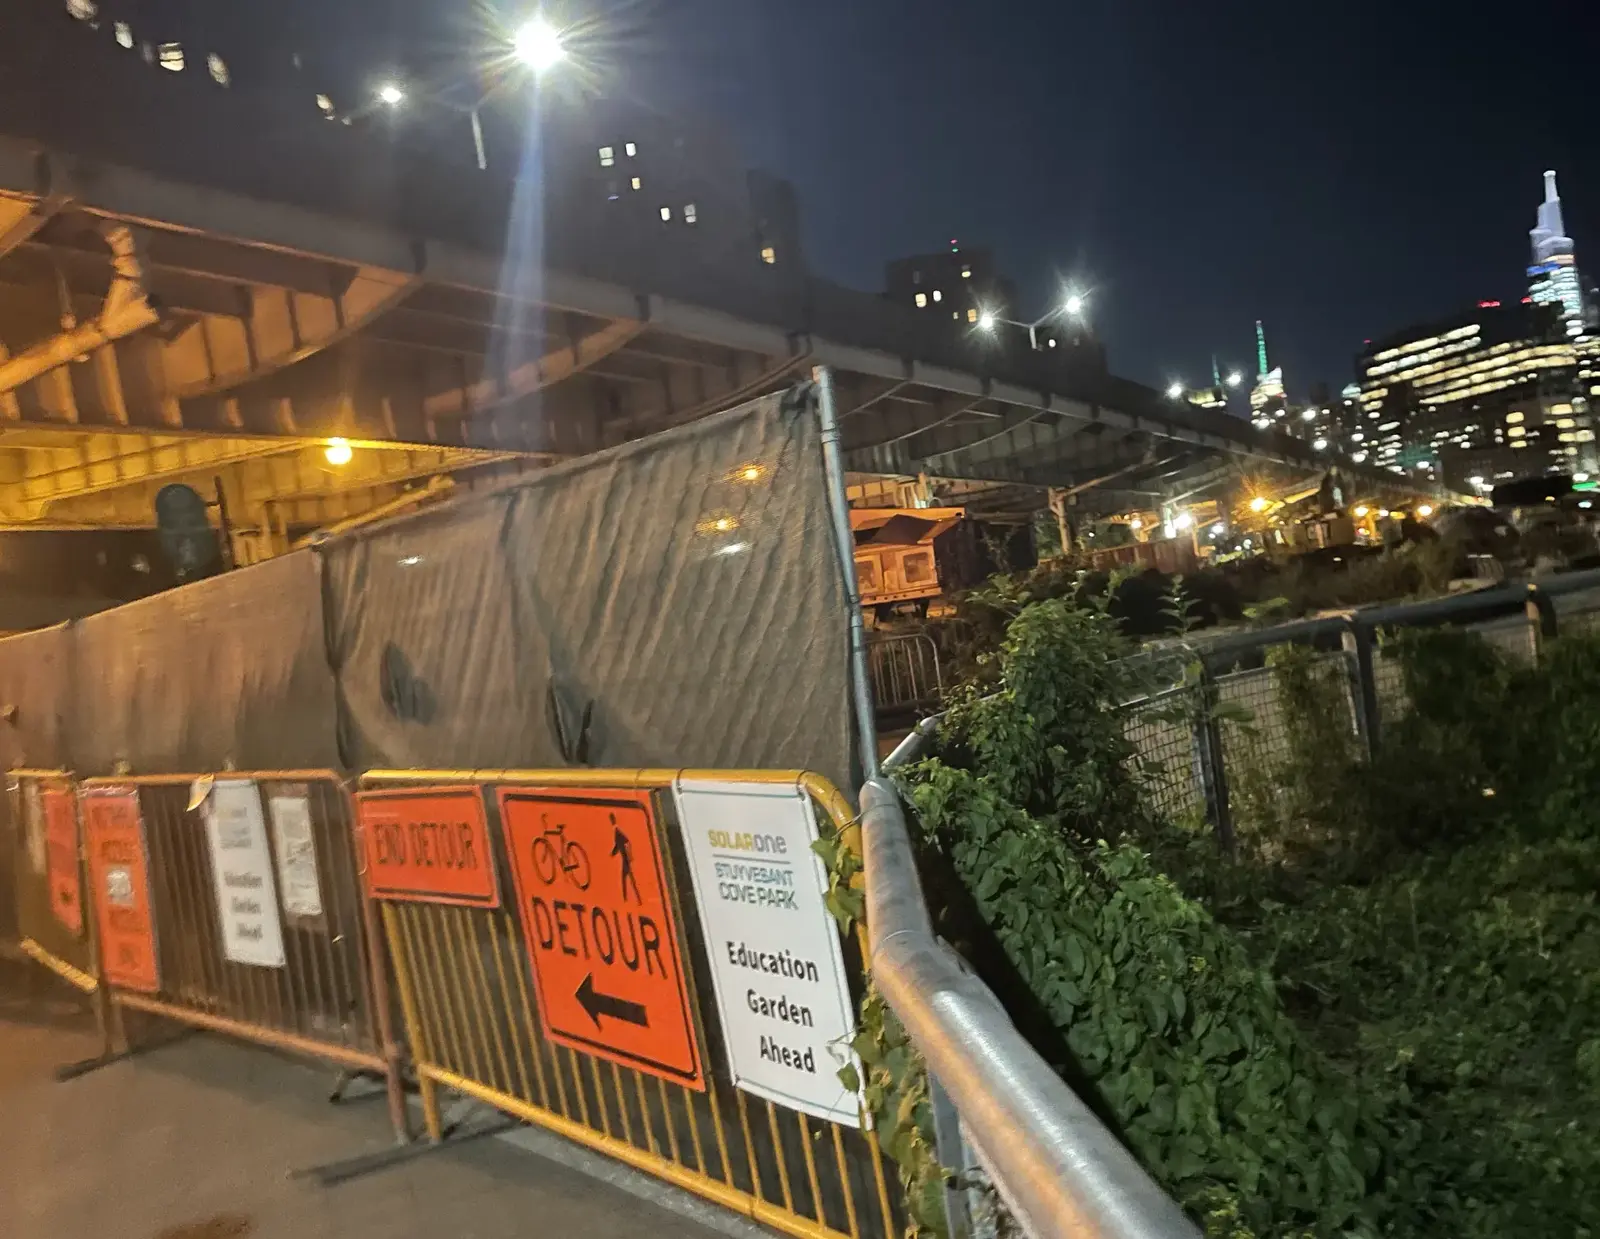 This was taken while viewing the full moon at 20th Street at East River Park.  You can see Stuy Cove's sign is still on the barrier, but this amazing garden is being  razed for ESCR Project Area 2 - September 20, 2021